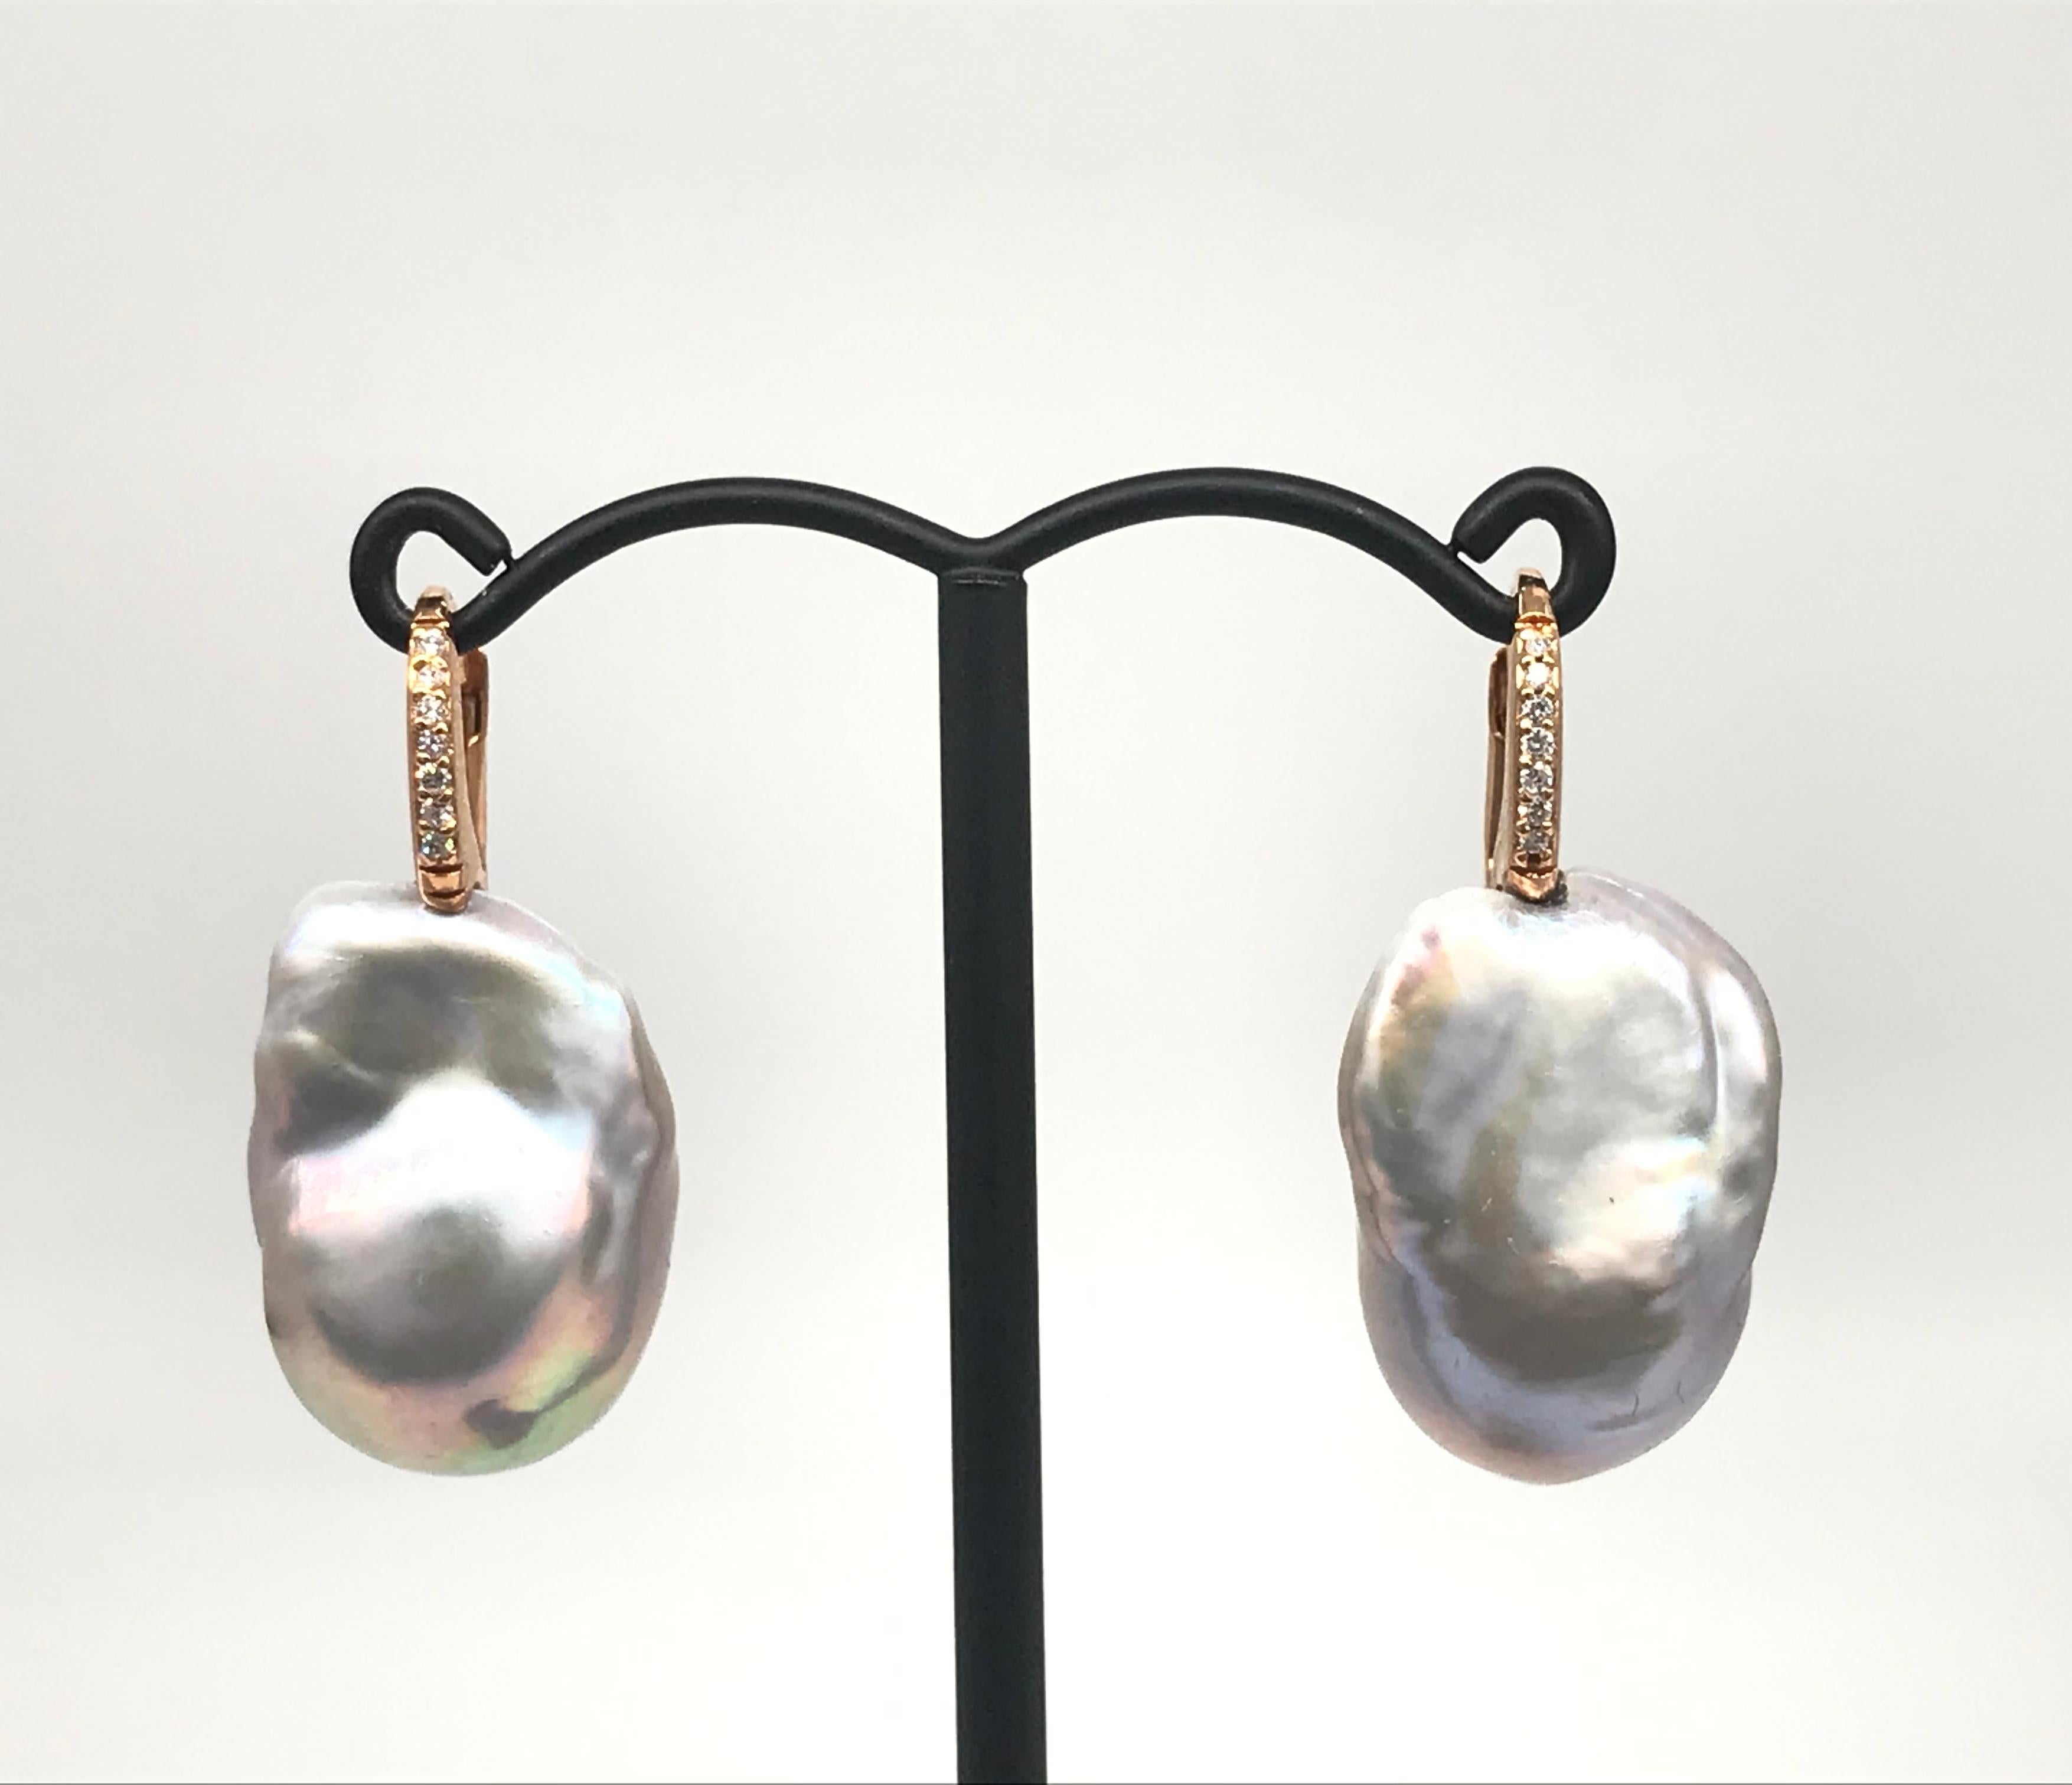 Rose Gold 18k with Diamonds and Baroque South of Seas Grey Pearls Drop Earrings
Weight of Gold 2.60 grams
2 Baroque Pearls
14 White Diamonds 0.170 ct / Round Shape /  color G purity SI
Rose Gold 18 k weight of gold 2.60 grams
Can be adapted to ear